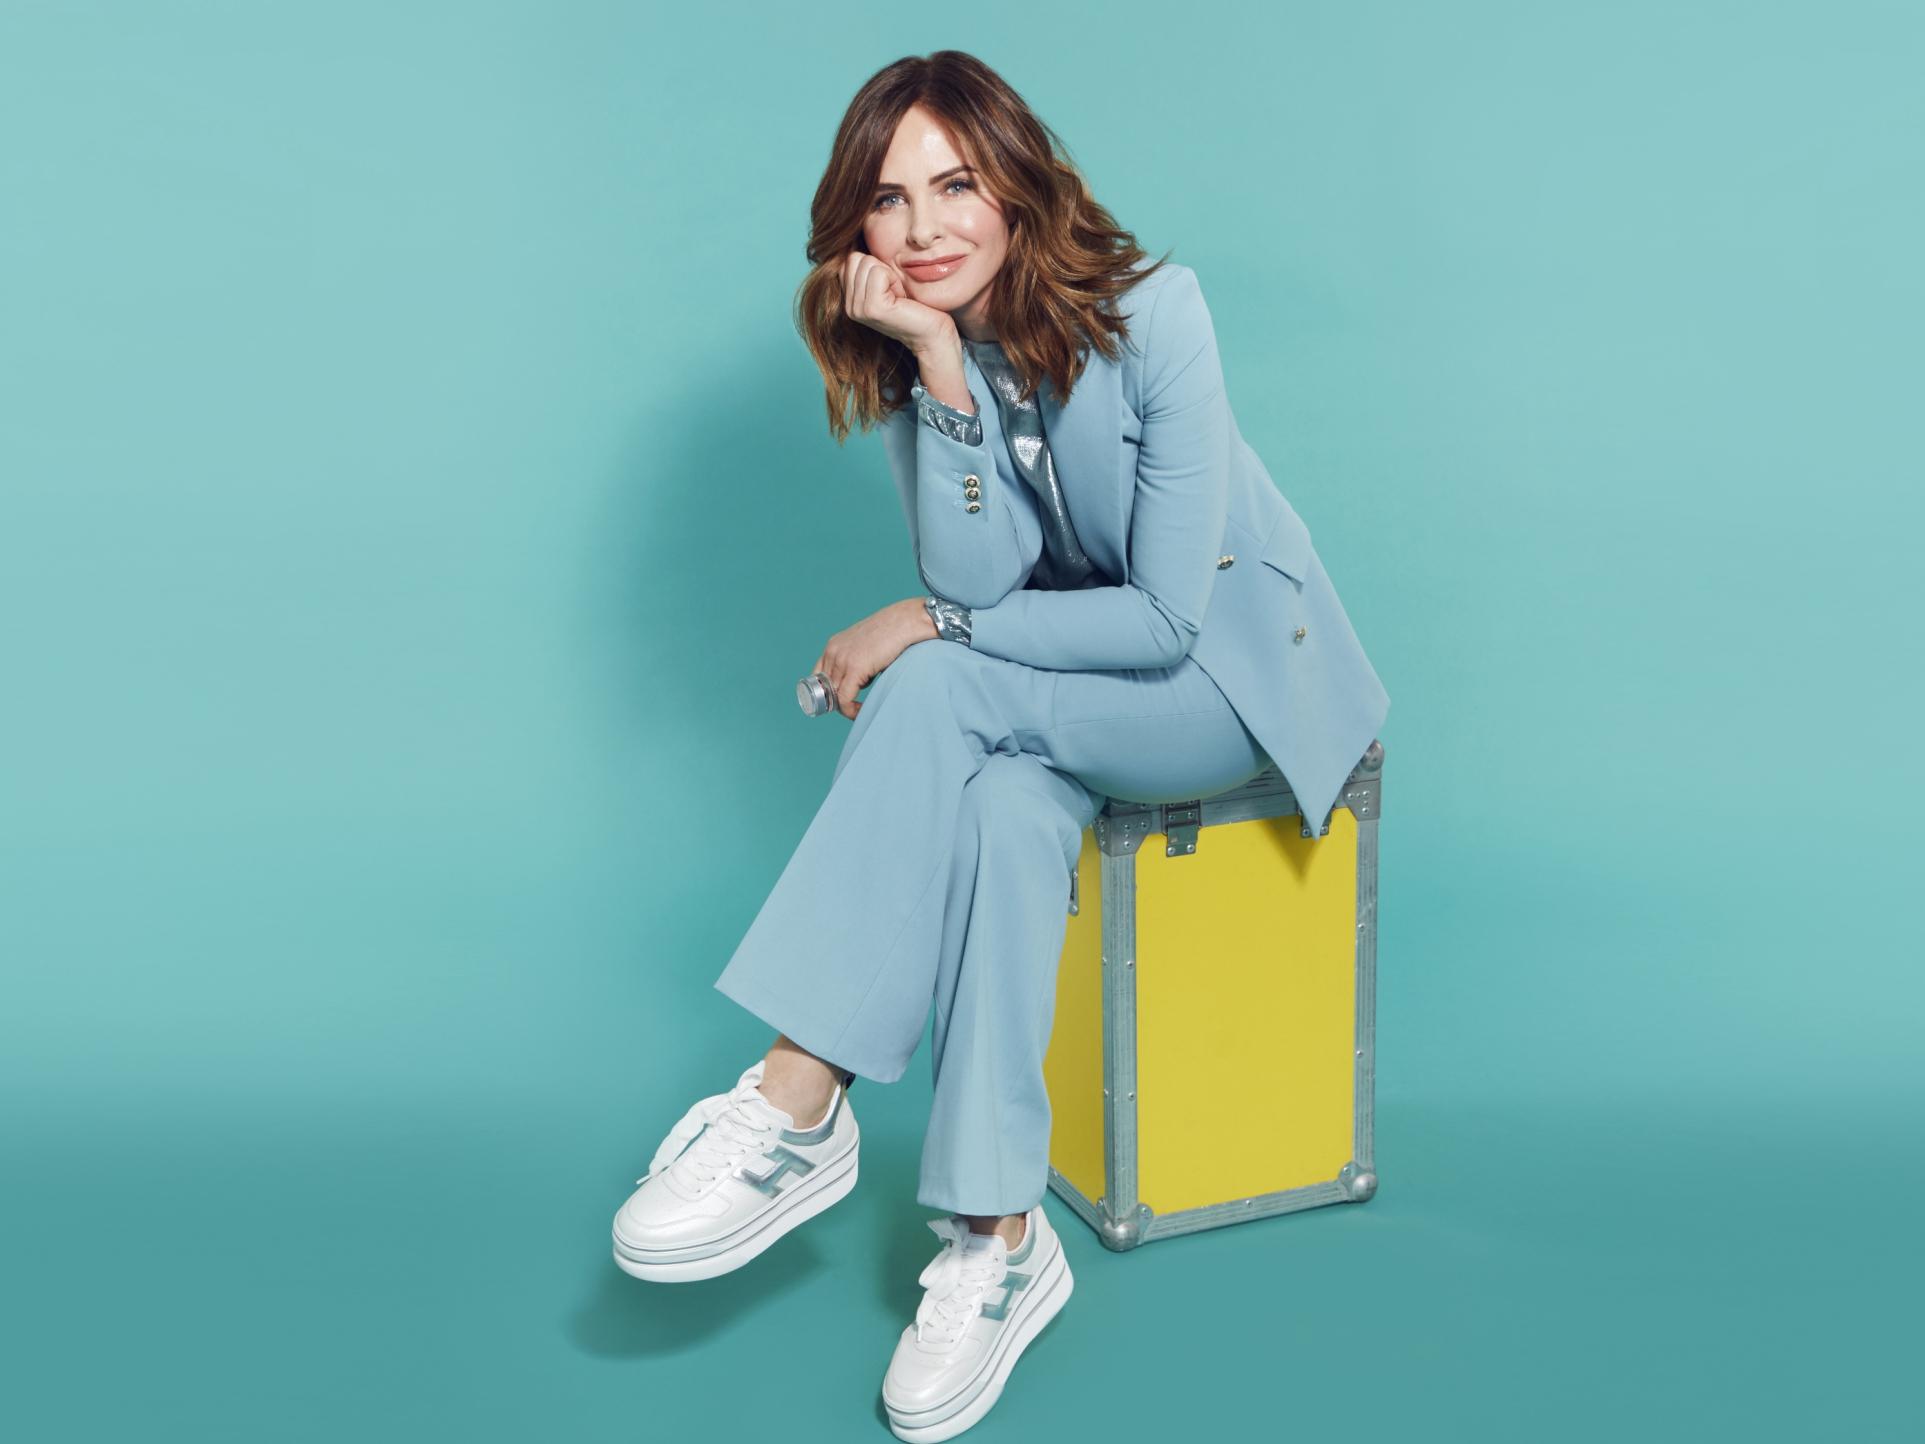 Trinny Woodall's secret ingredient is her frank advice